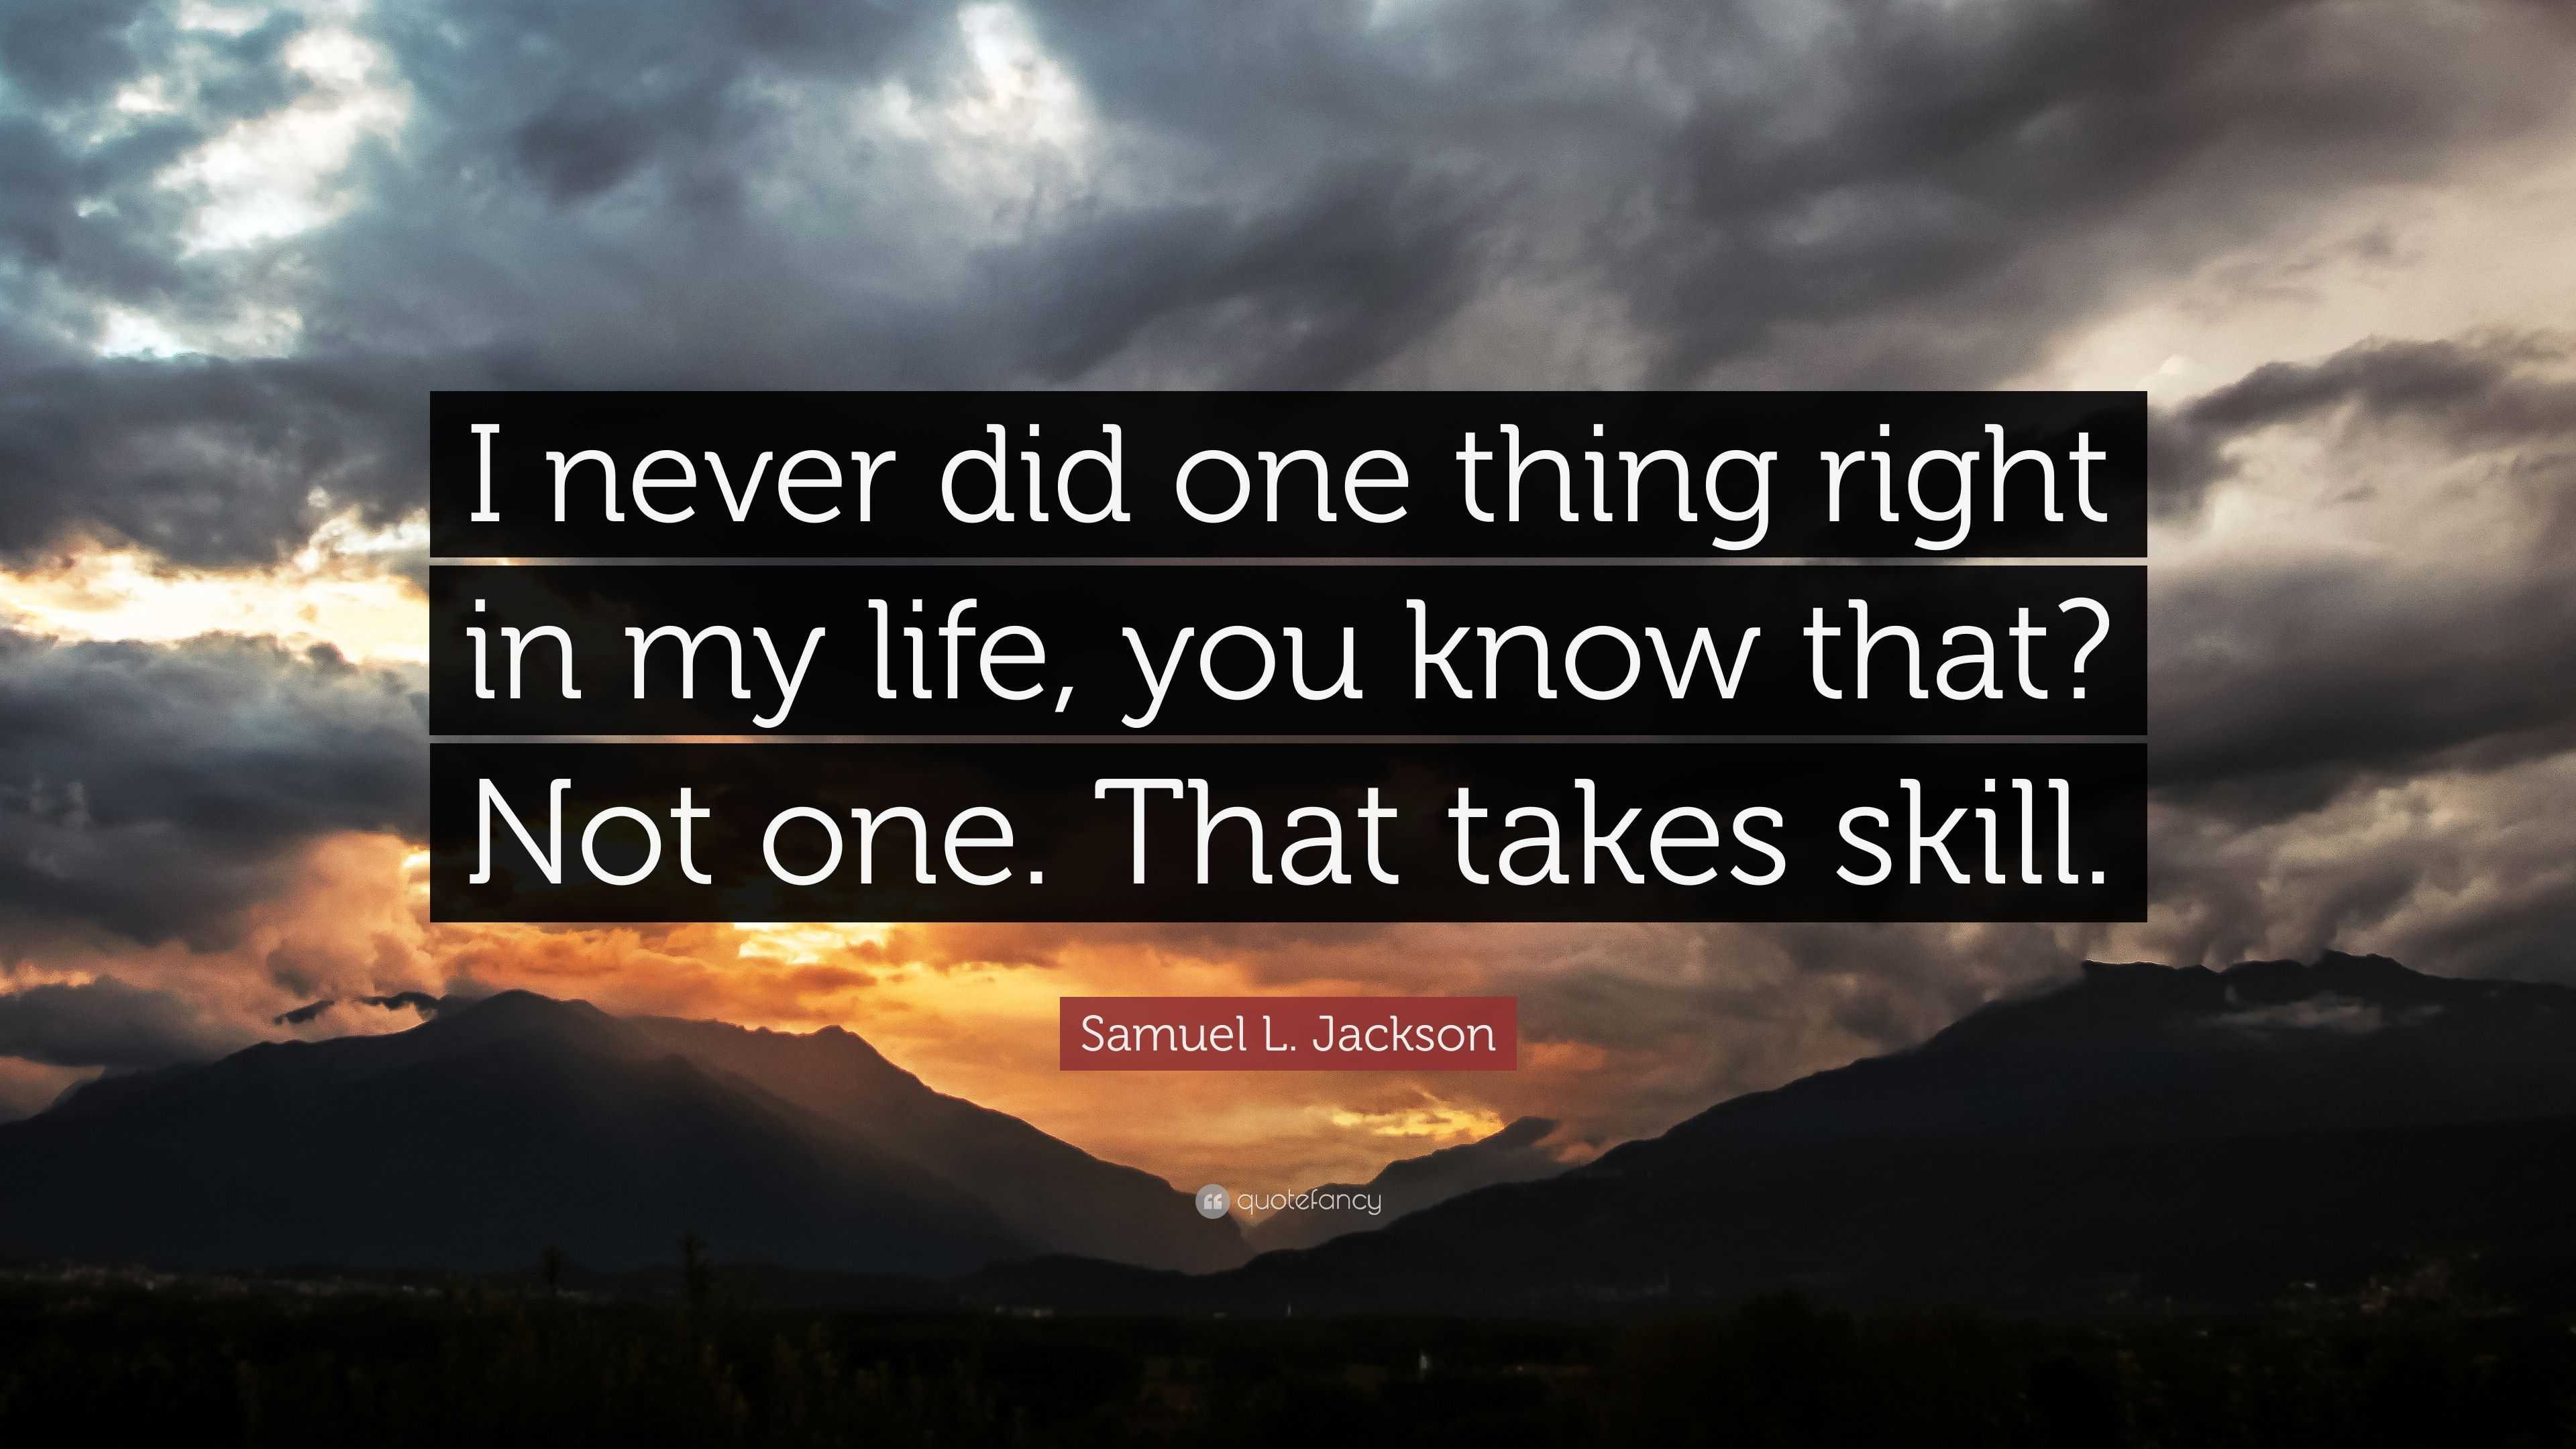 Samuel L. Jackson Quote: “I never did one thing right in my life, you